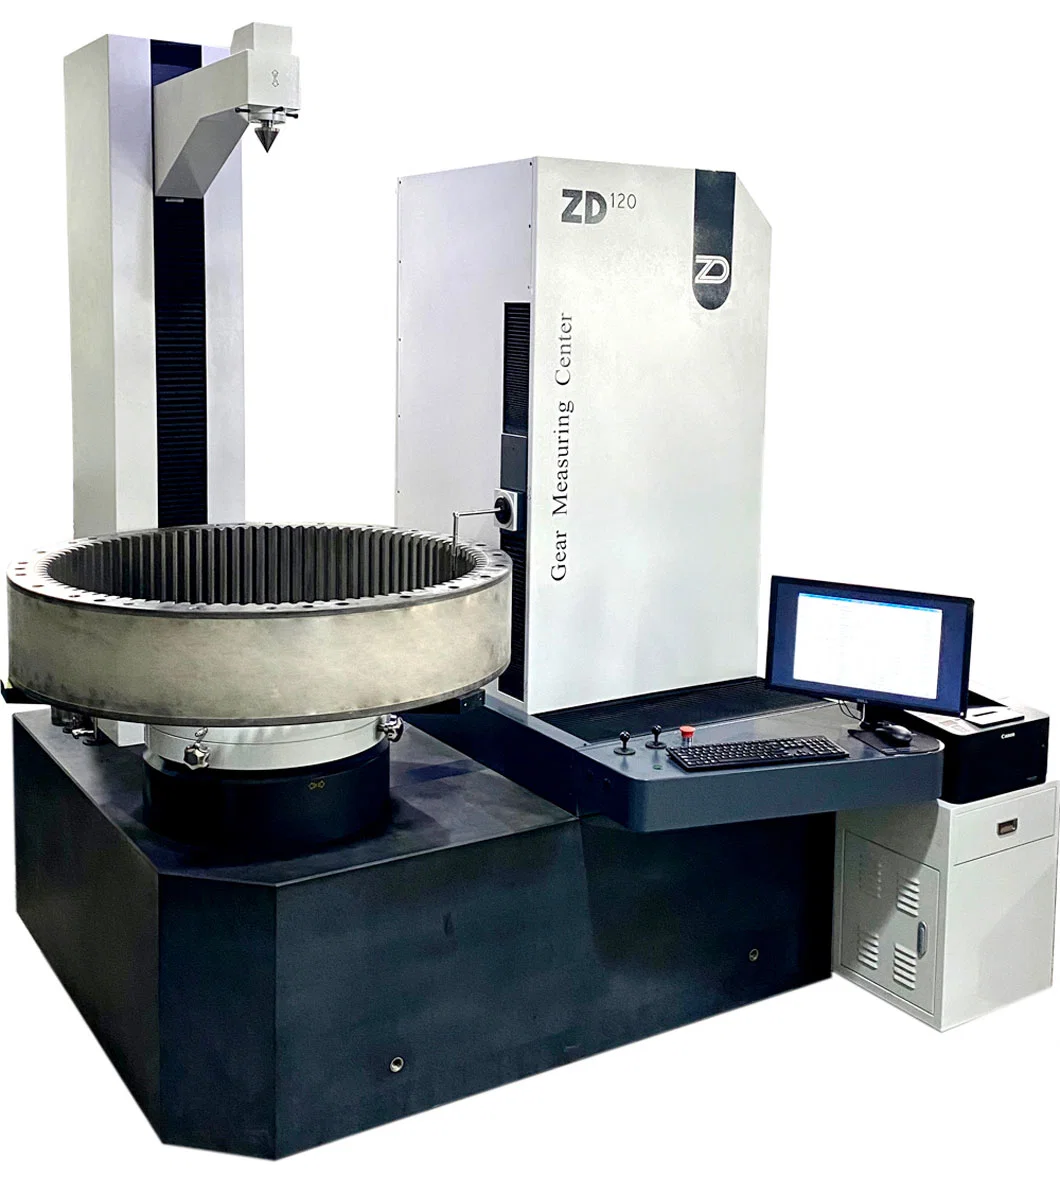 Zd20 CNC Mainstream Gear Measuring Instruments Machine for Cylindrical Gear